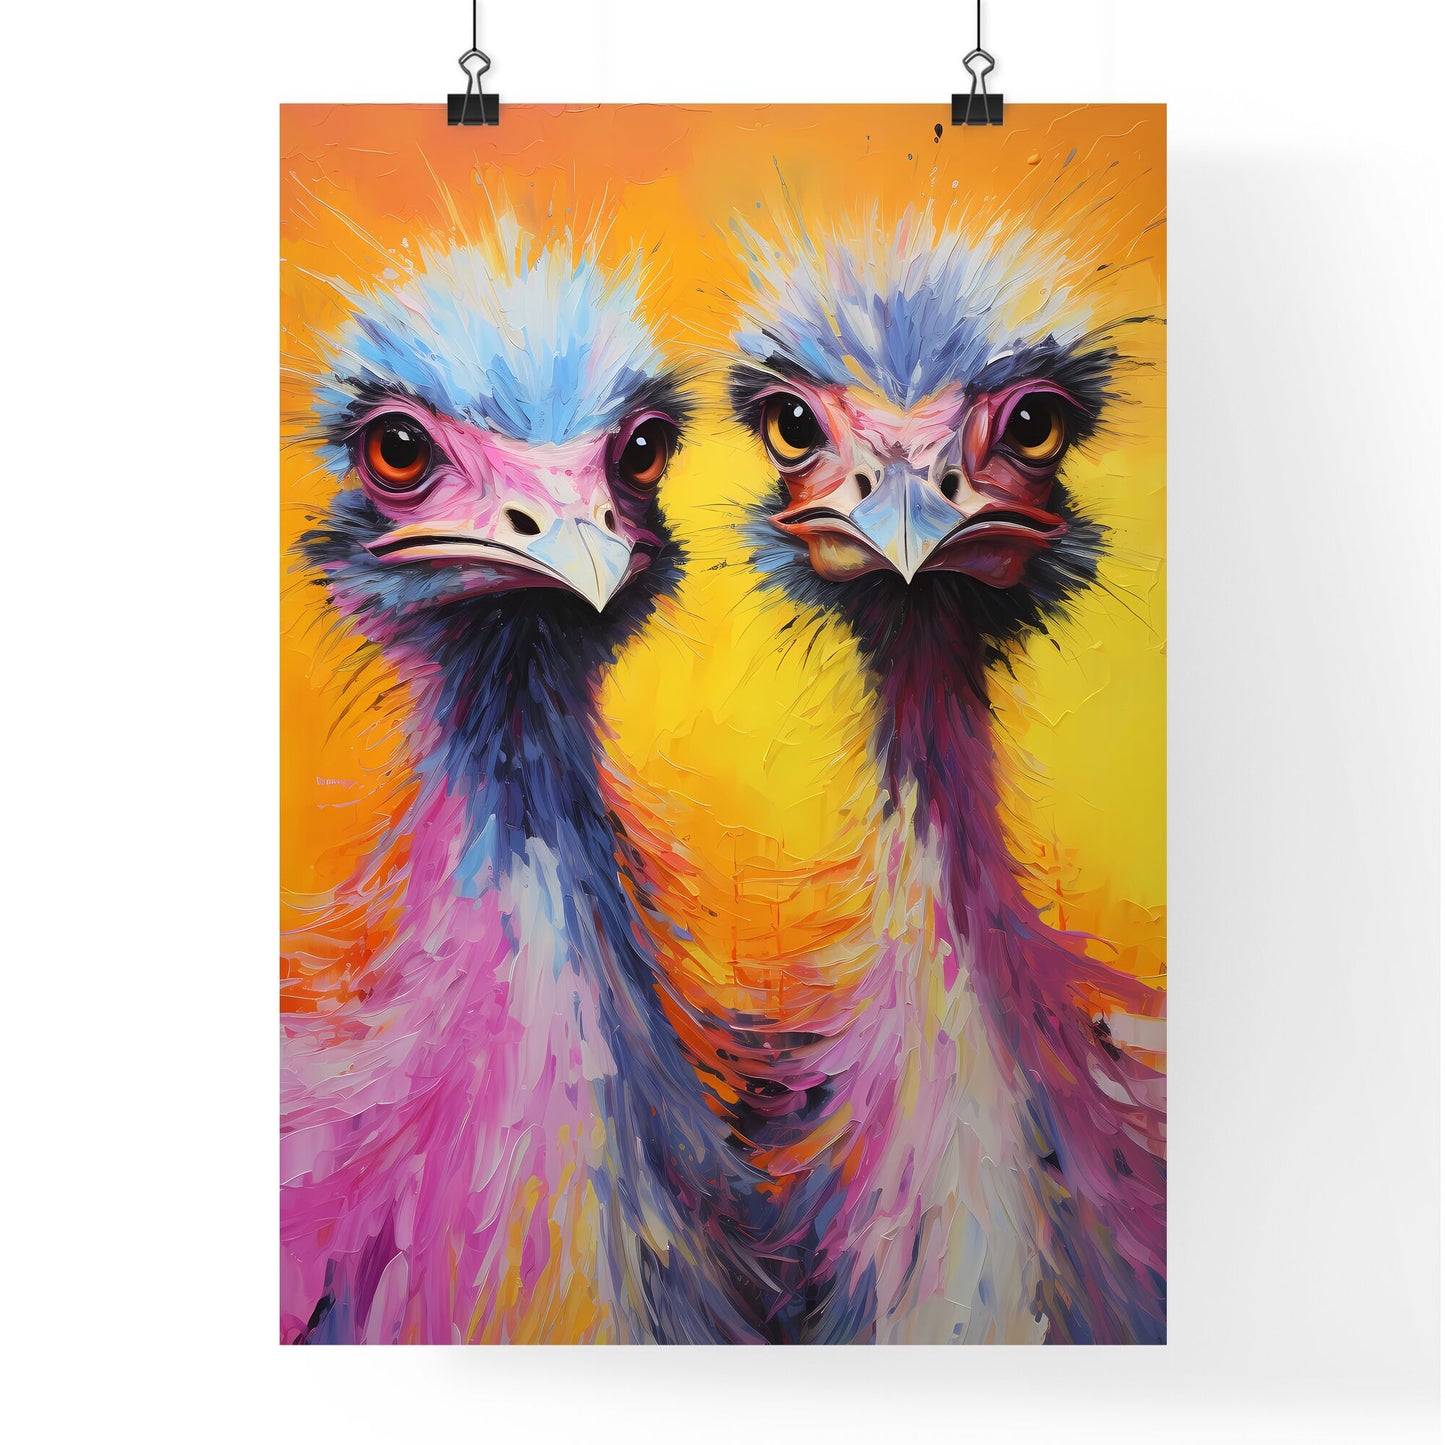 A Pair Of Ostrich In Africa - A Painting Of Two Birds Default Title